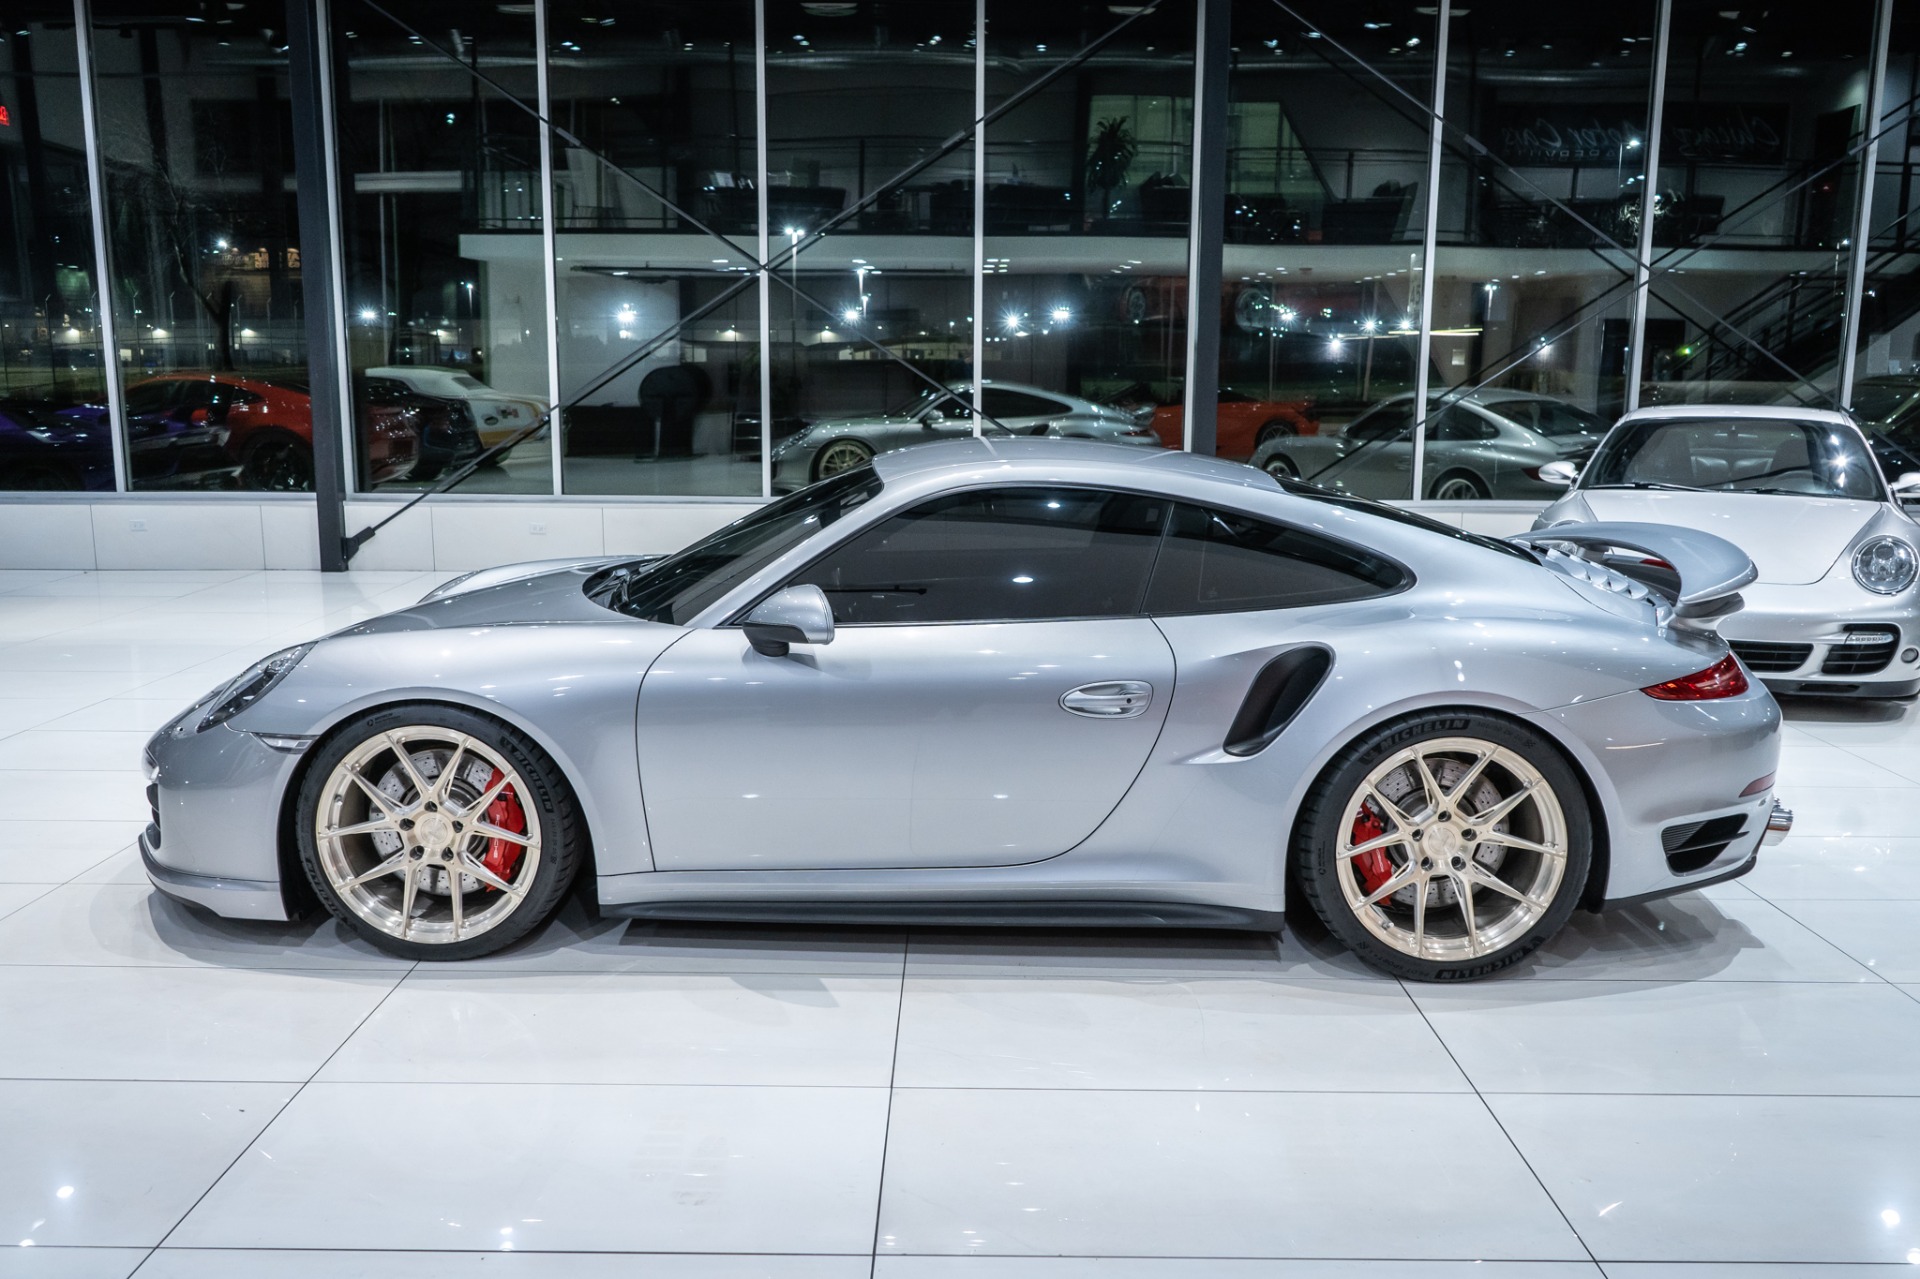 Used-2014-Porsche-911-Turbo-Awd-Coupe-Cicio-Vgt-Turbos-Stage-4-BC-Forged-Wheels-Excellent